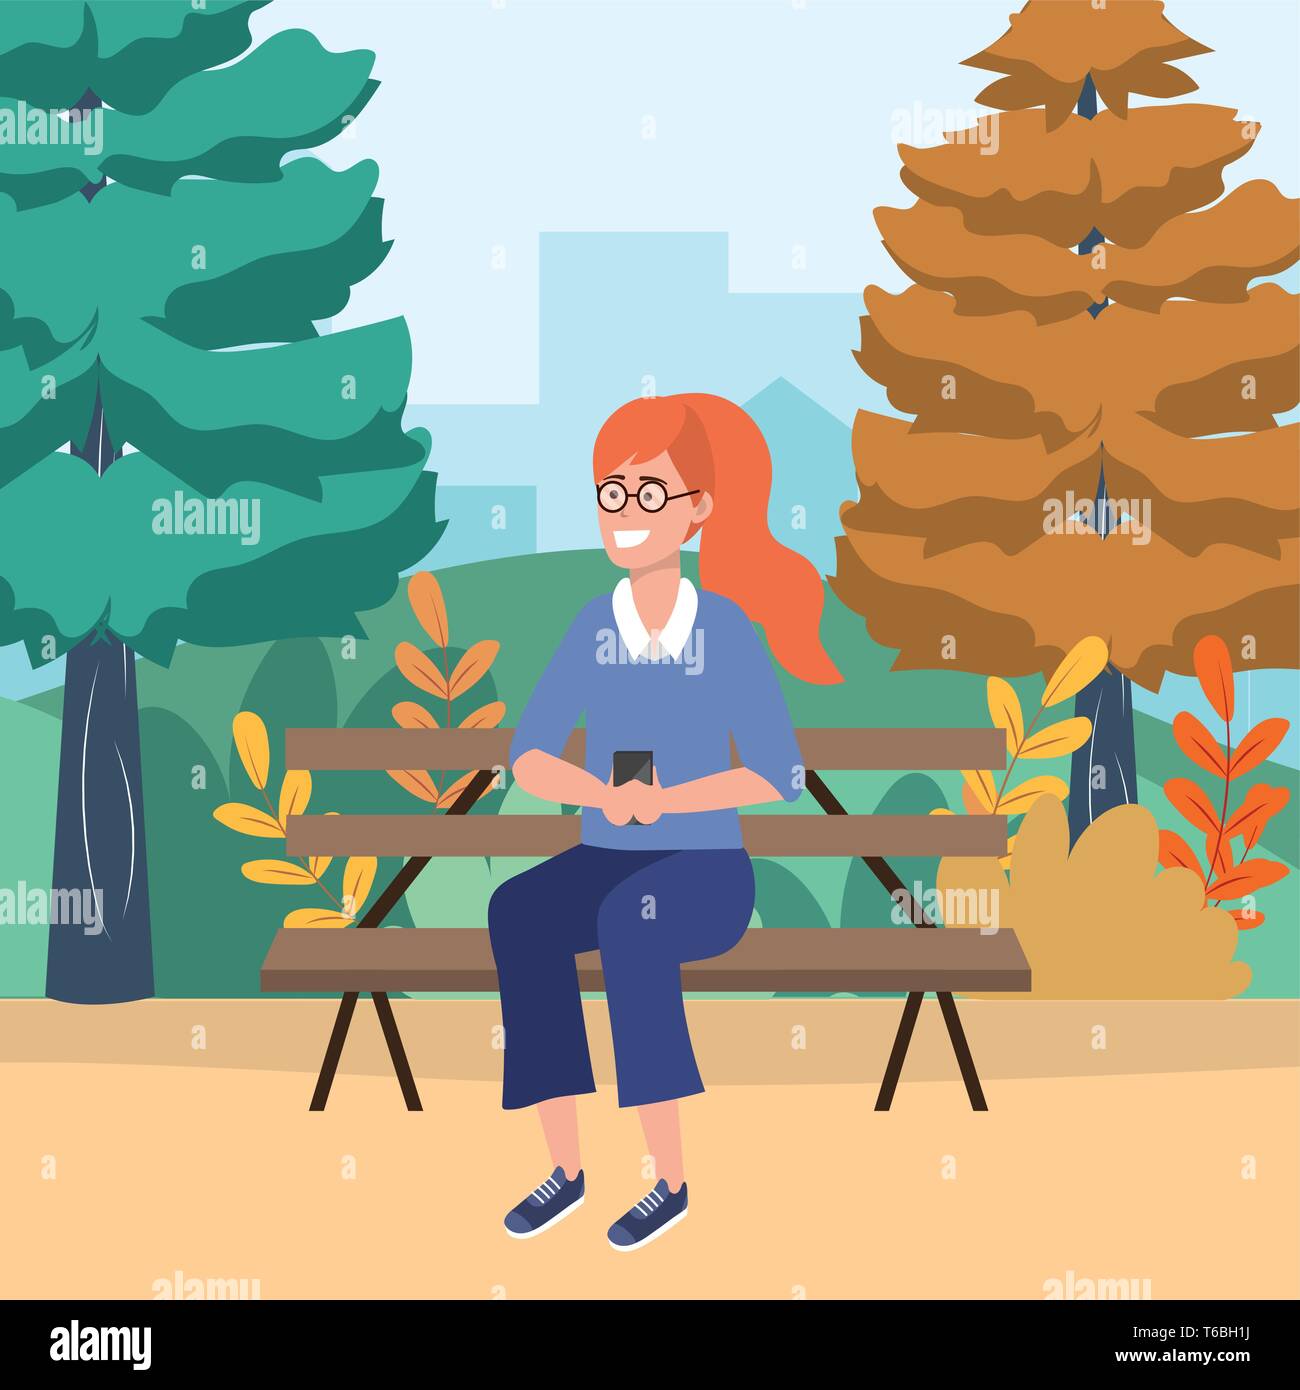 Millennial person stylish outfit sitting in park bench using smartphone texting glasses redhead vector illustration graphic design Stock Vector